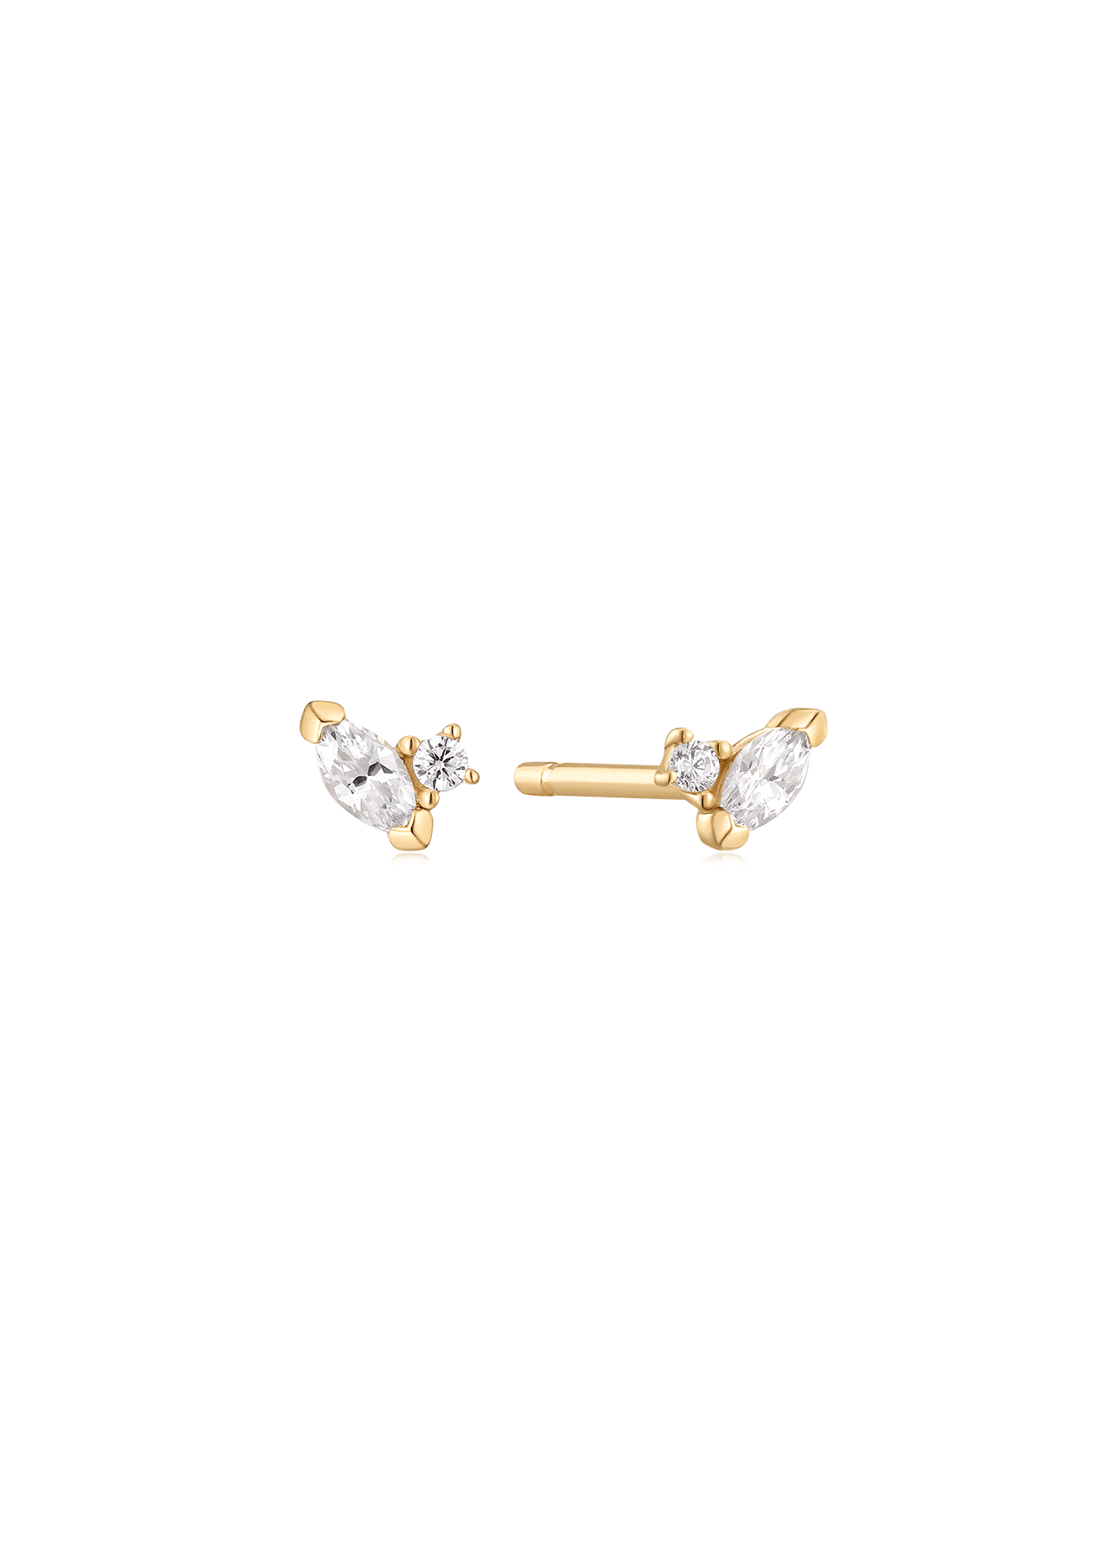 The Duet Cultured Diamond 9ct Solid Gold Stud Earrings (Pair) - Molten Store